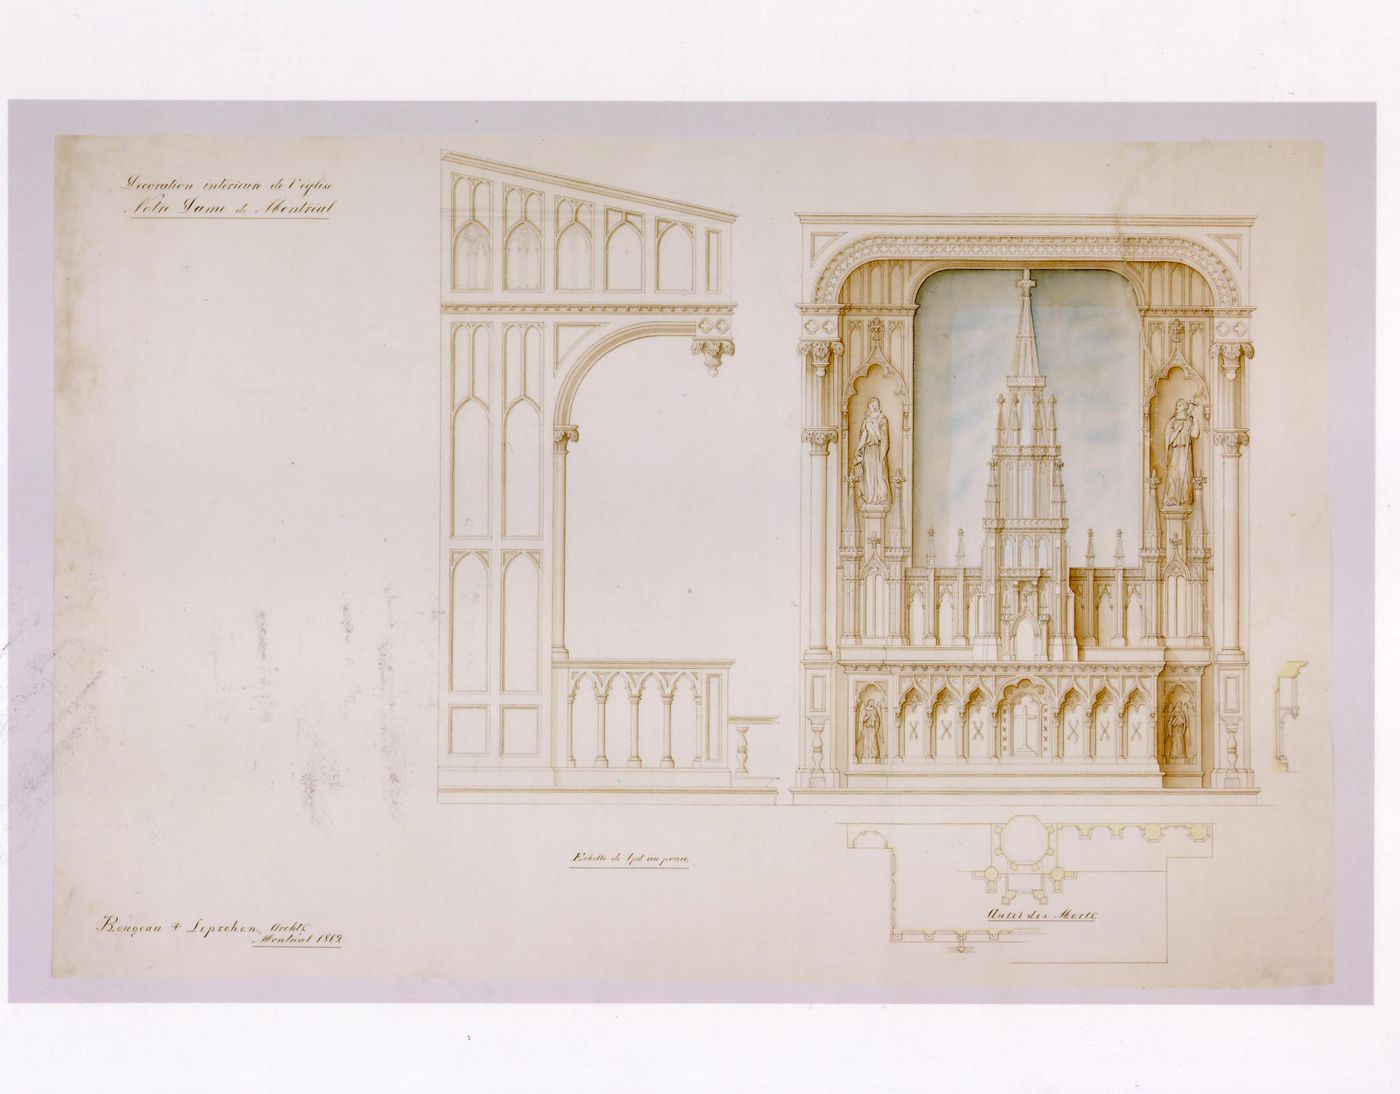 Front and lateral elevations, plan and section for the Autel des Morts for the interior design by Bourgeau et Leprohon for Notre-Dame de Montréal